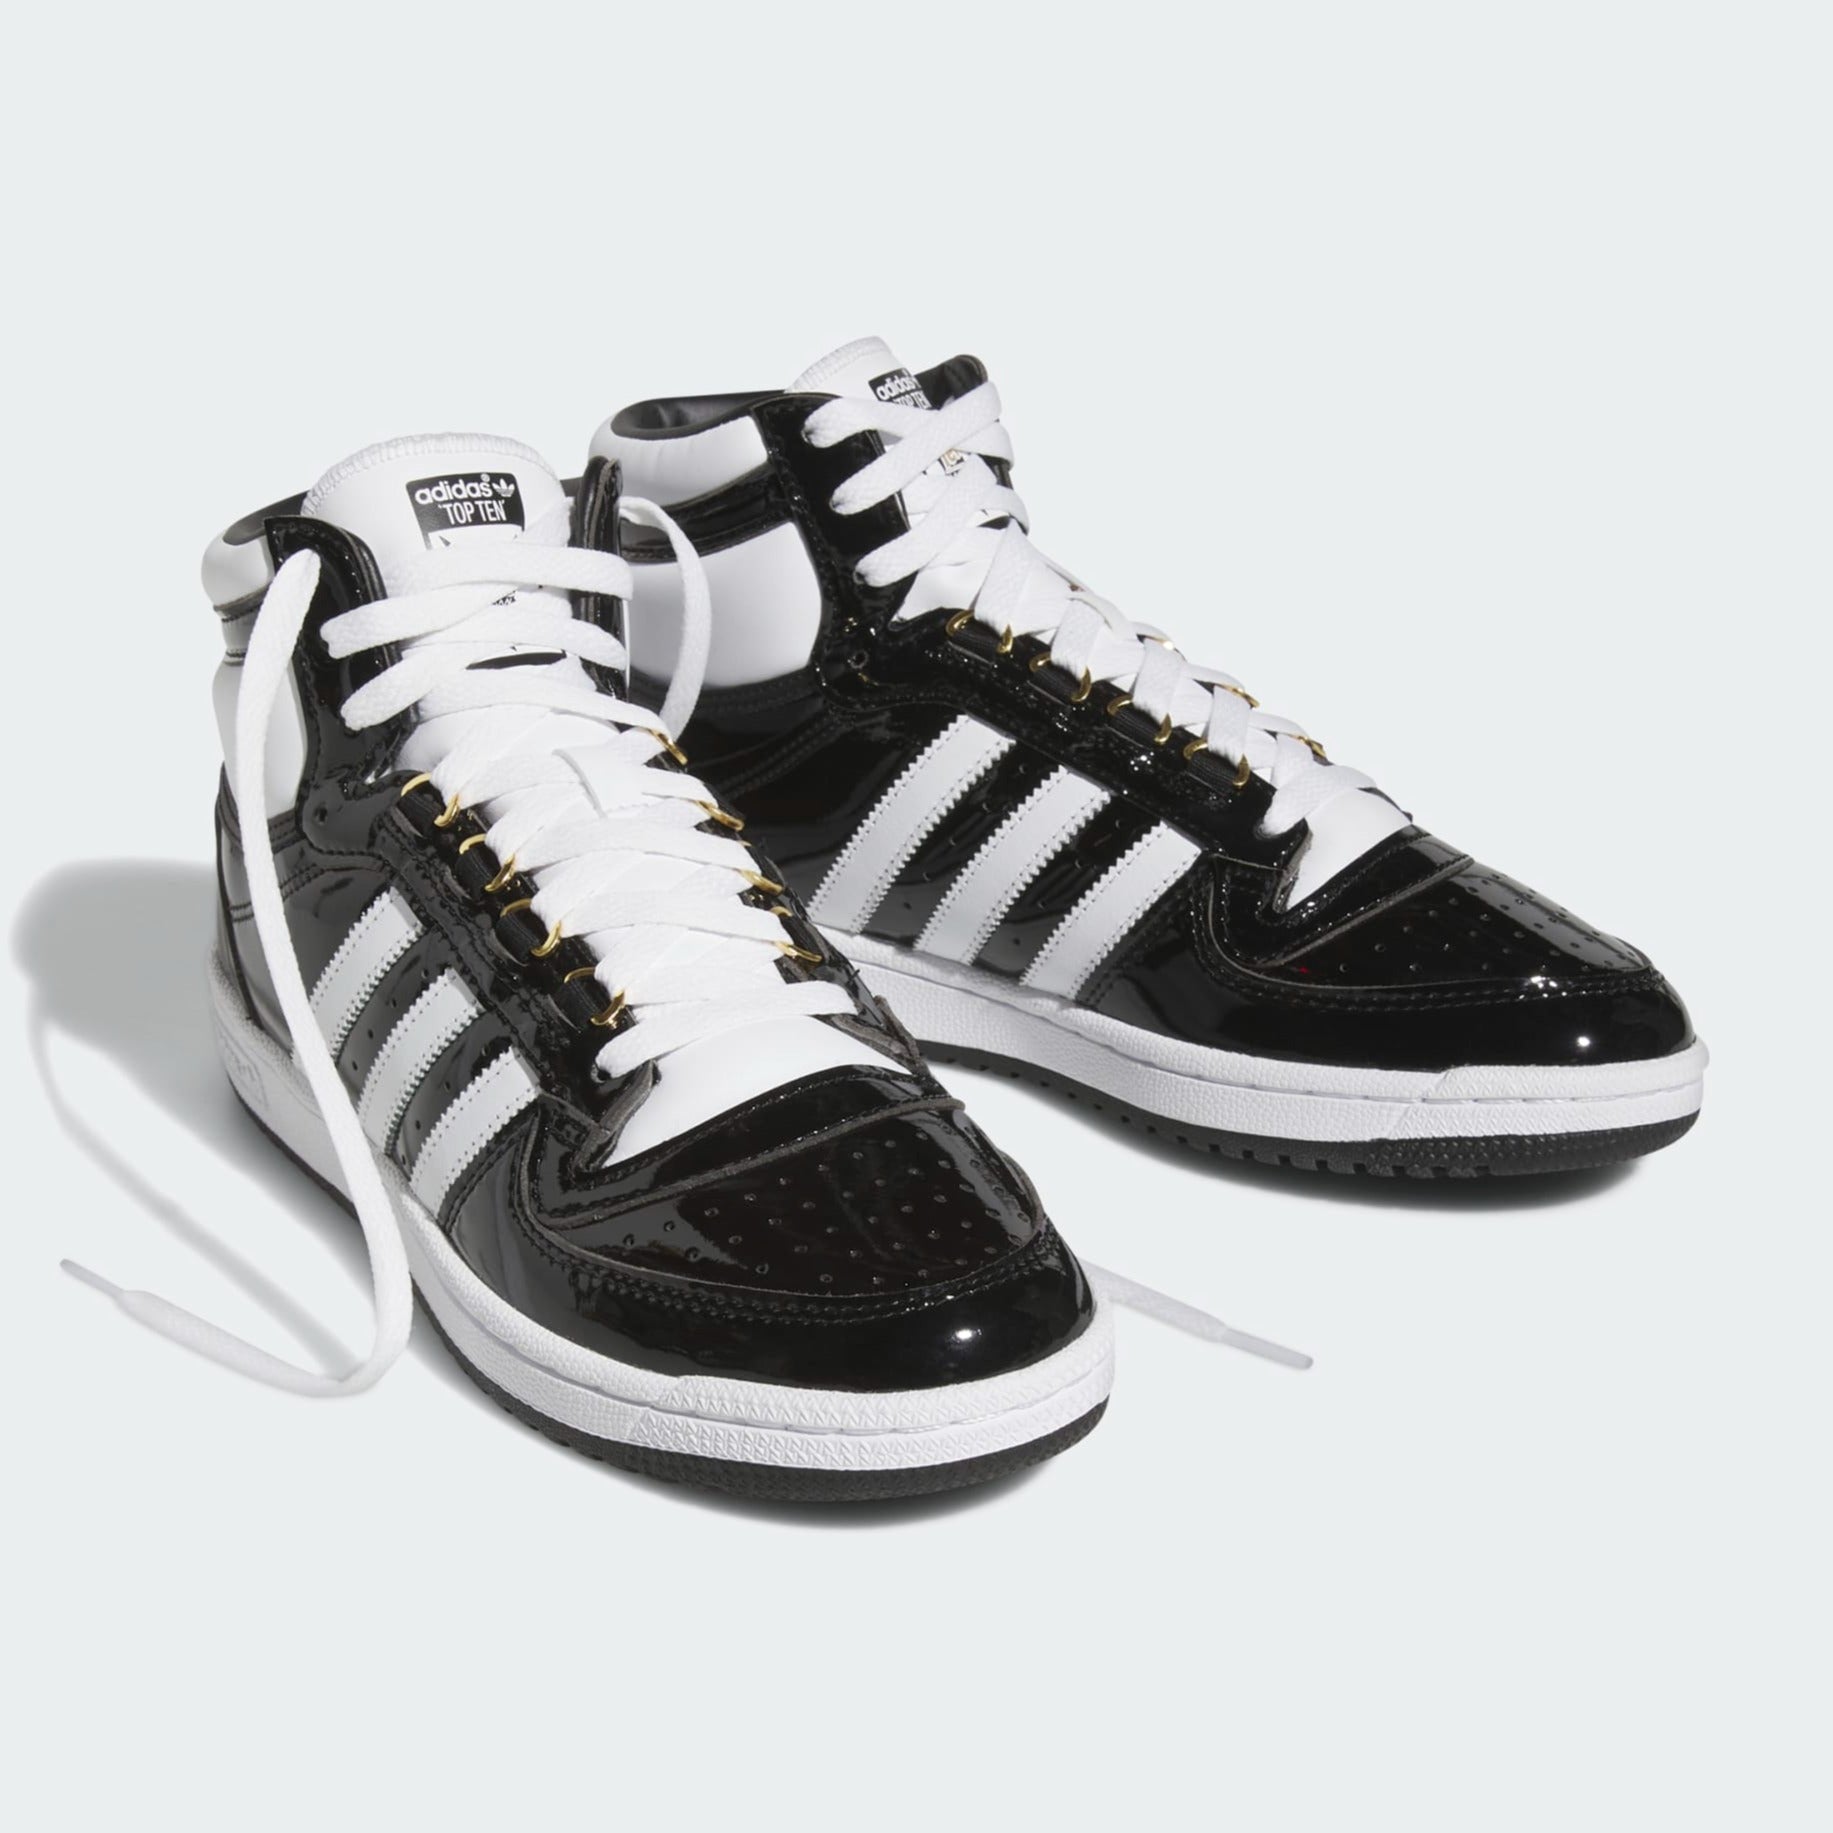 Adidas Top Ten Patent Leather Black White - Puffer Reds